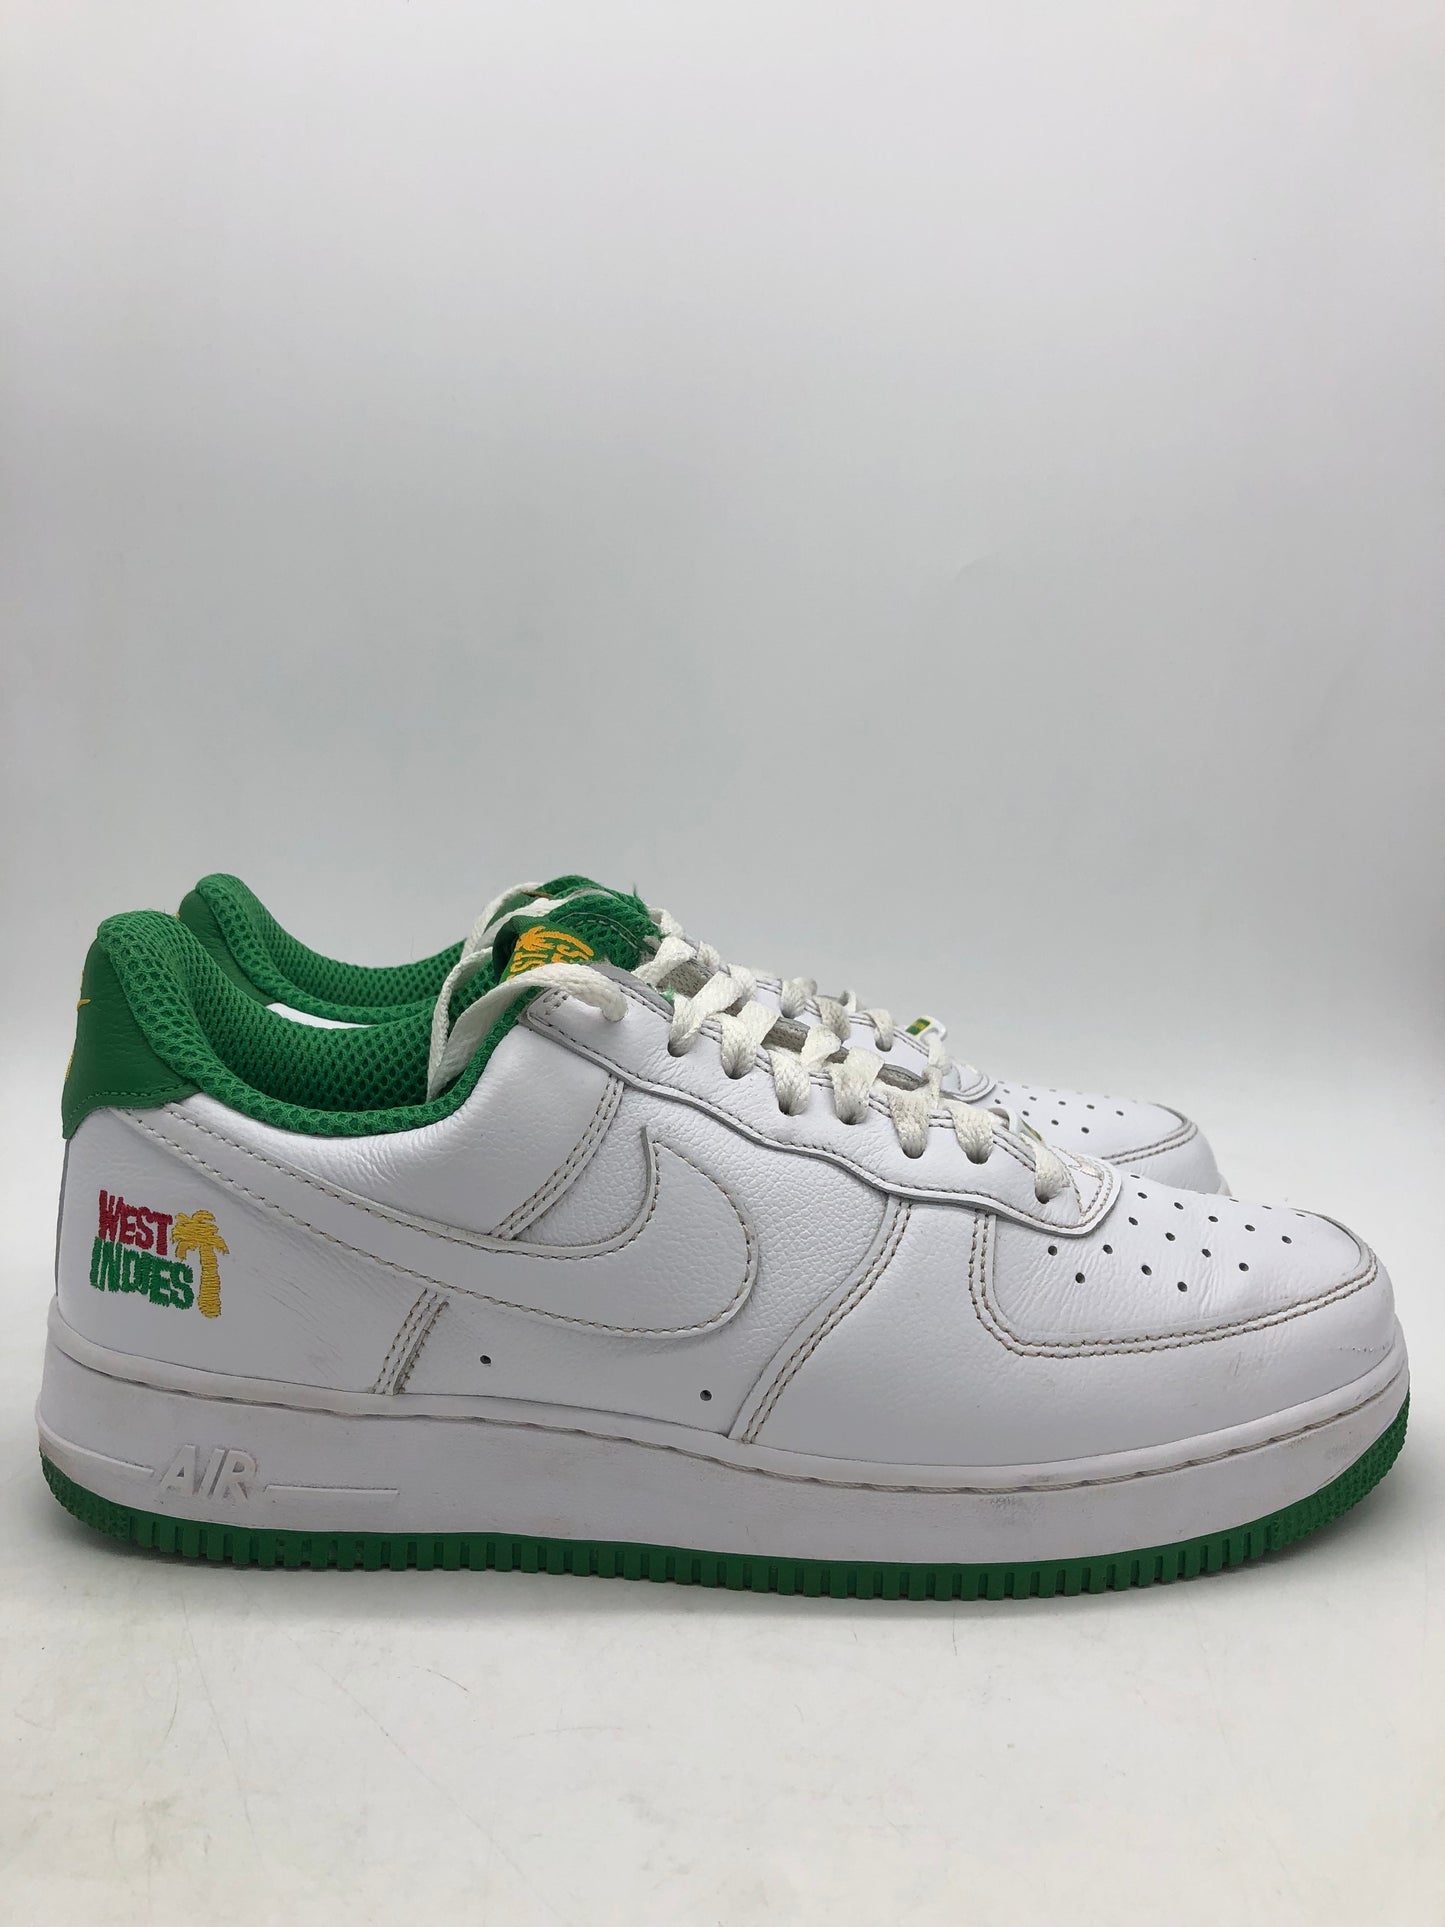 Preowned Nike Air Force 1 Low Retro QS West Indies Sz 10.5M/12W